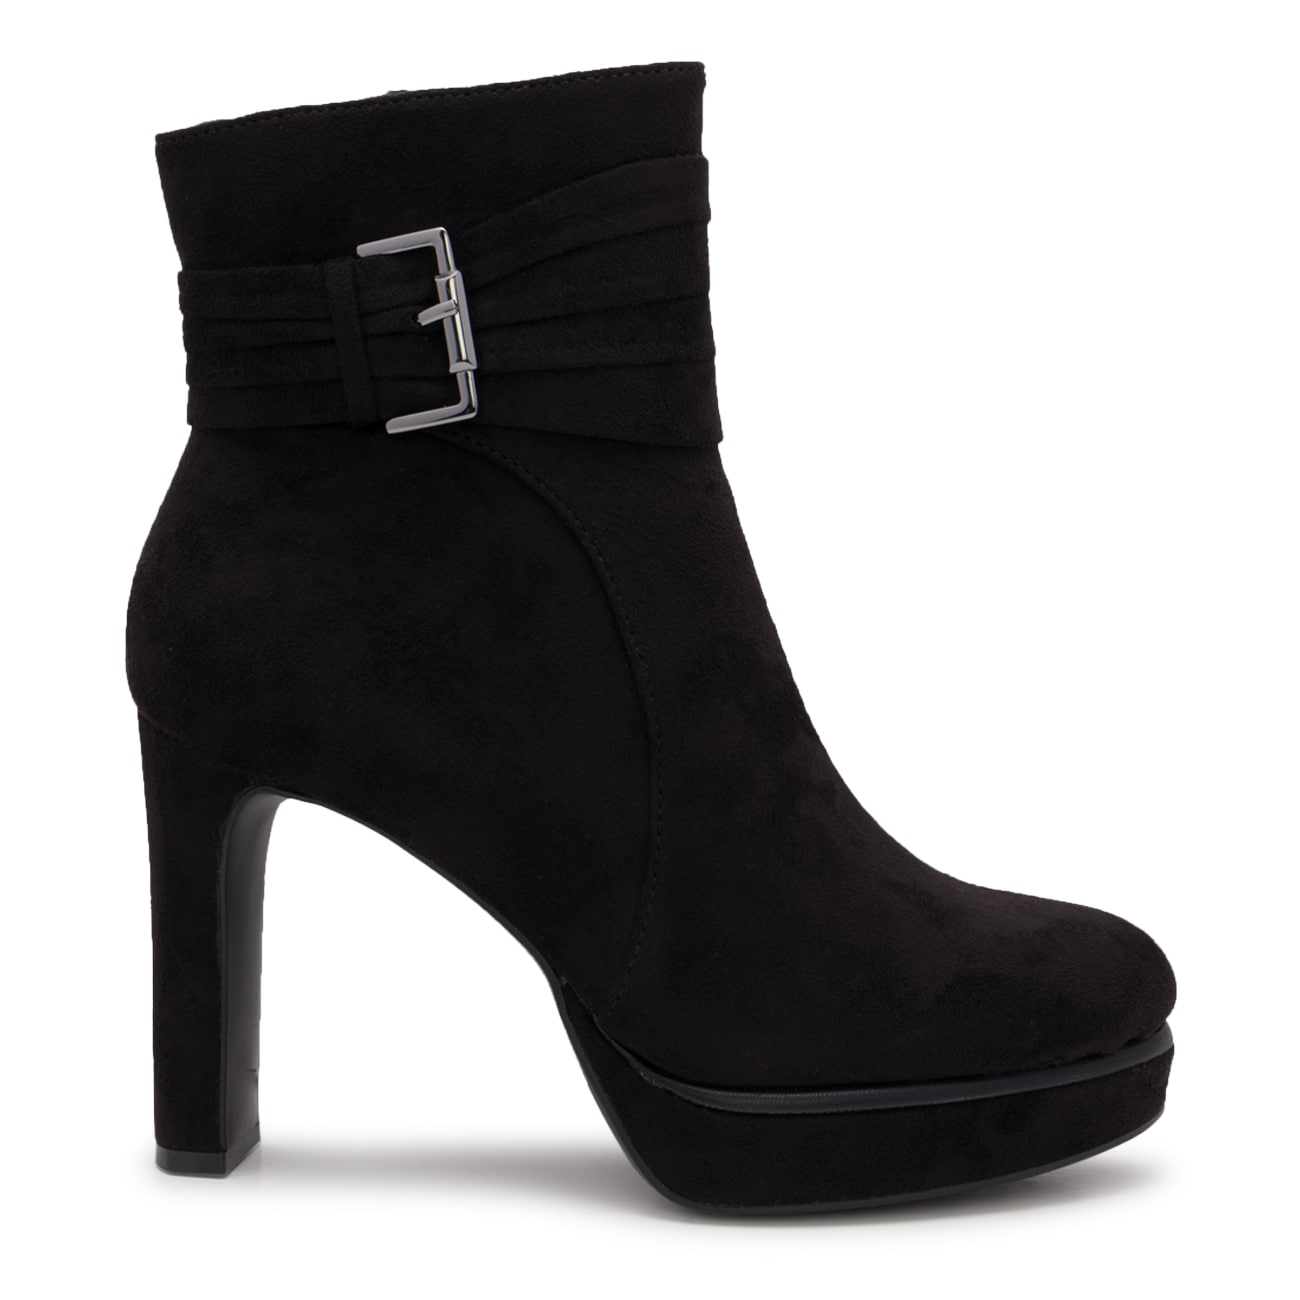 Impo Onora Platform Ankle Bootie | The Shoe Company